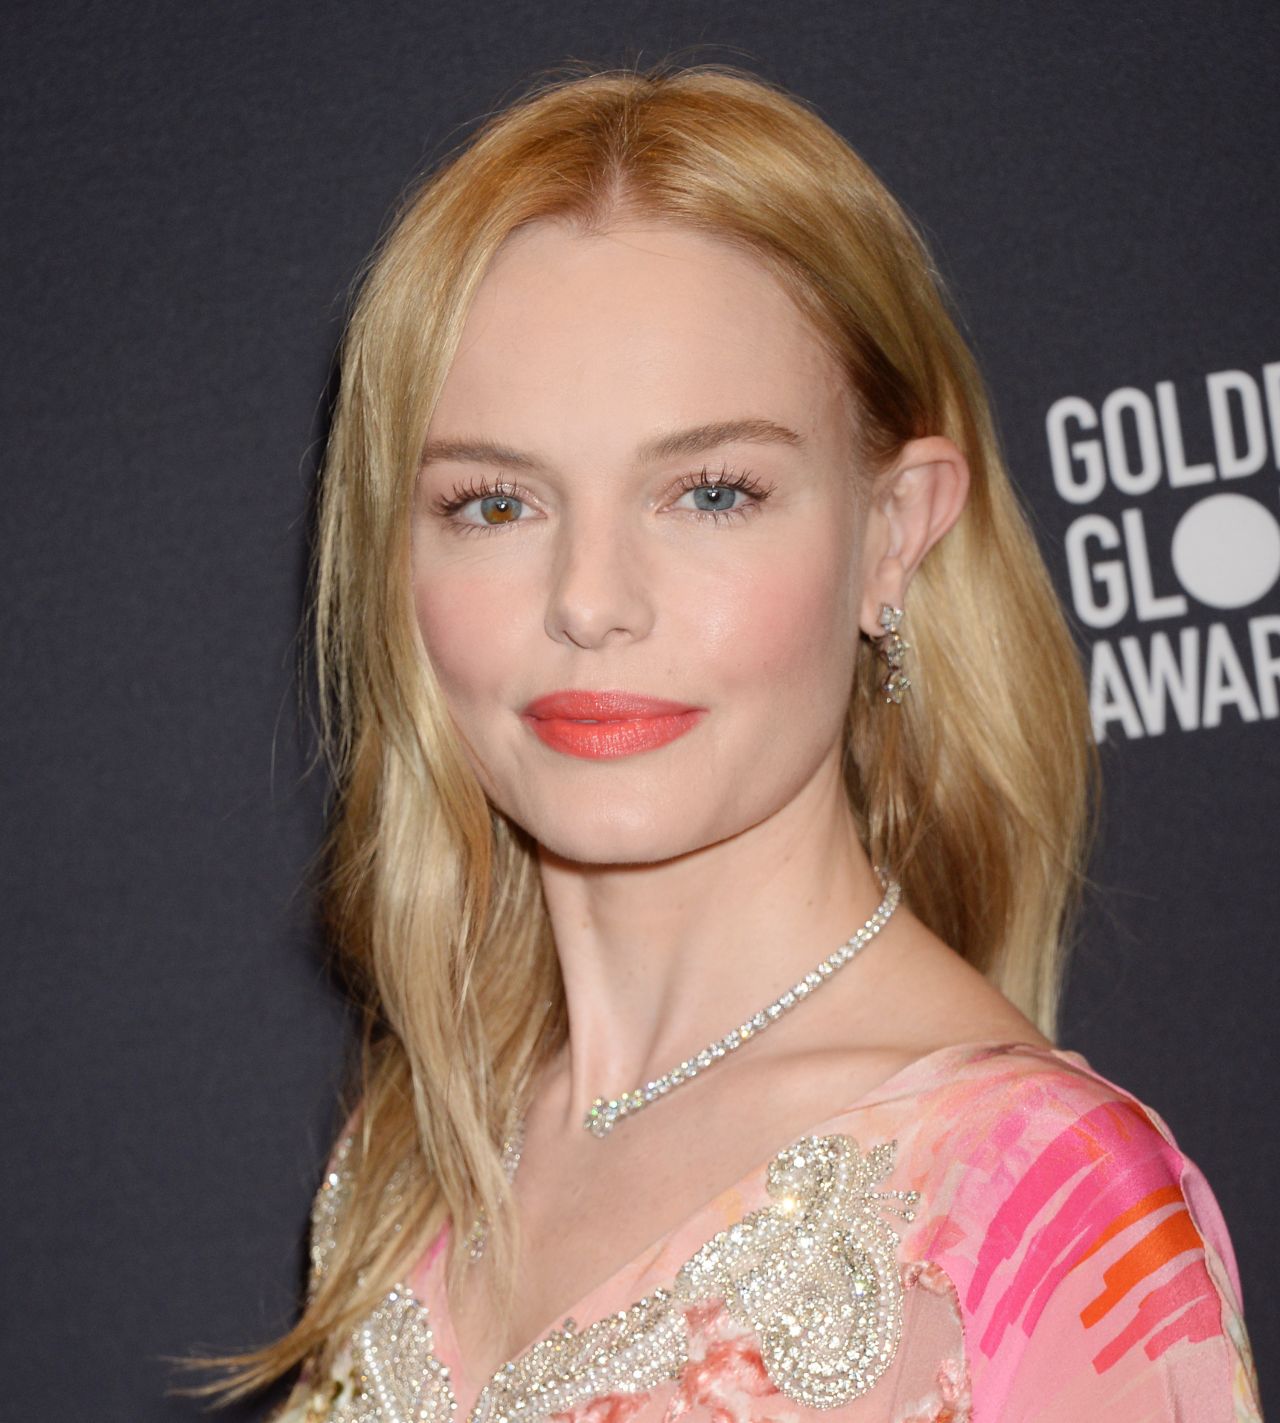 Kate Bosworth Hfpa And Instyle Celebrate Golden Globe Season In Los Angeles 11152017